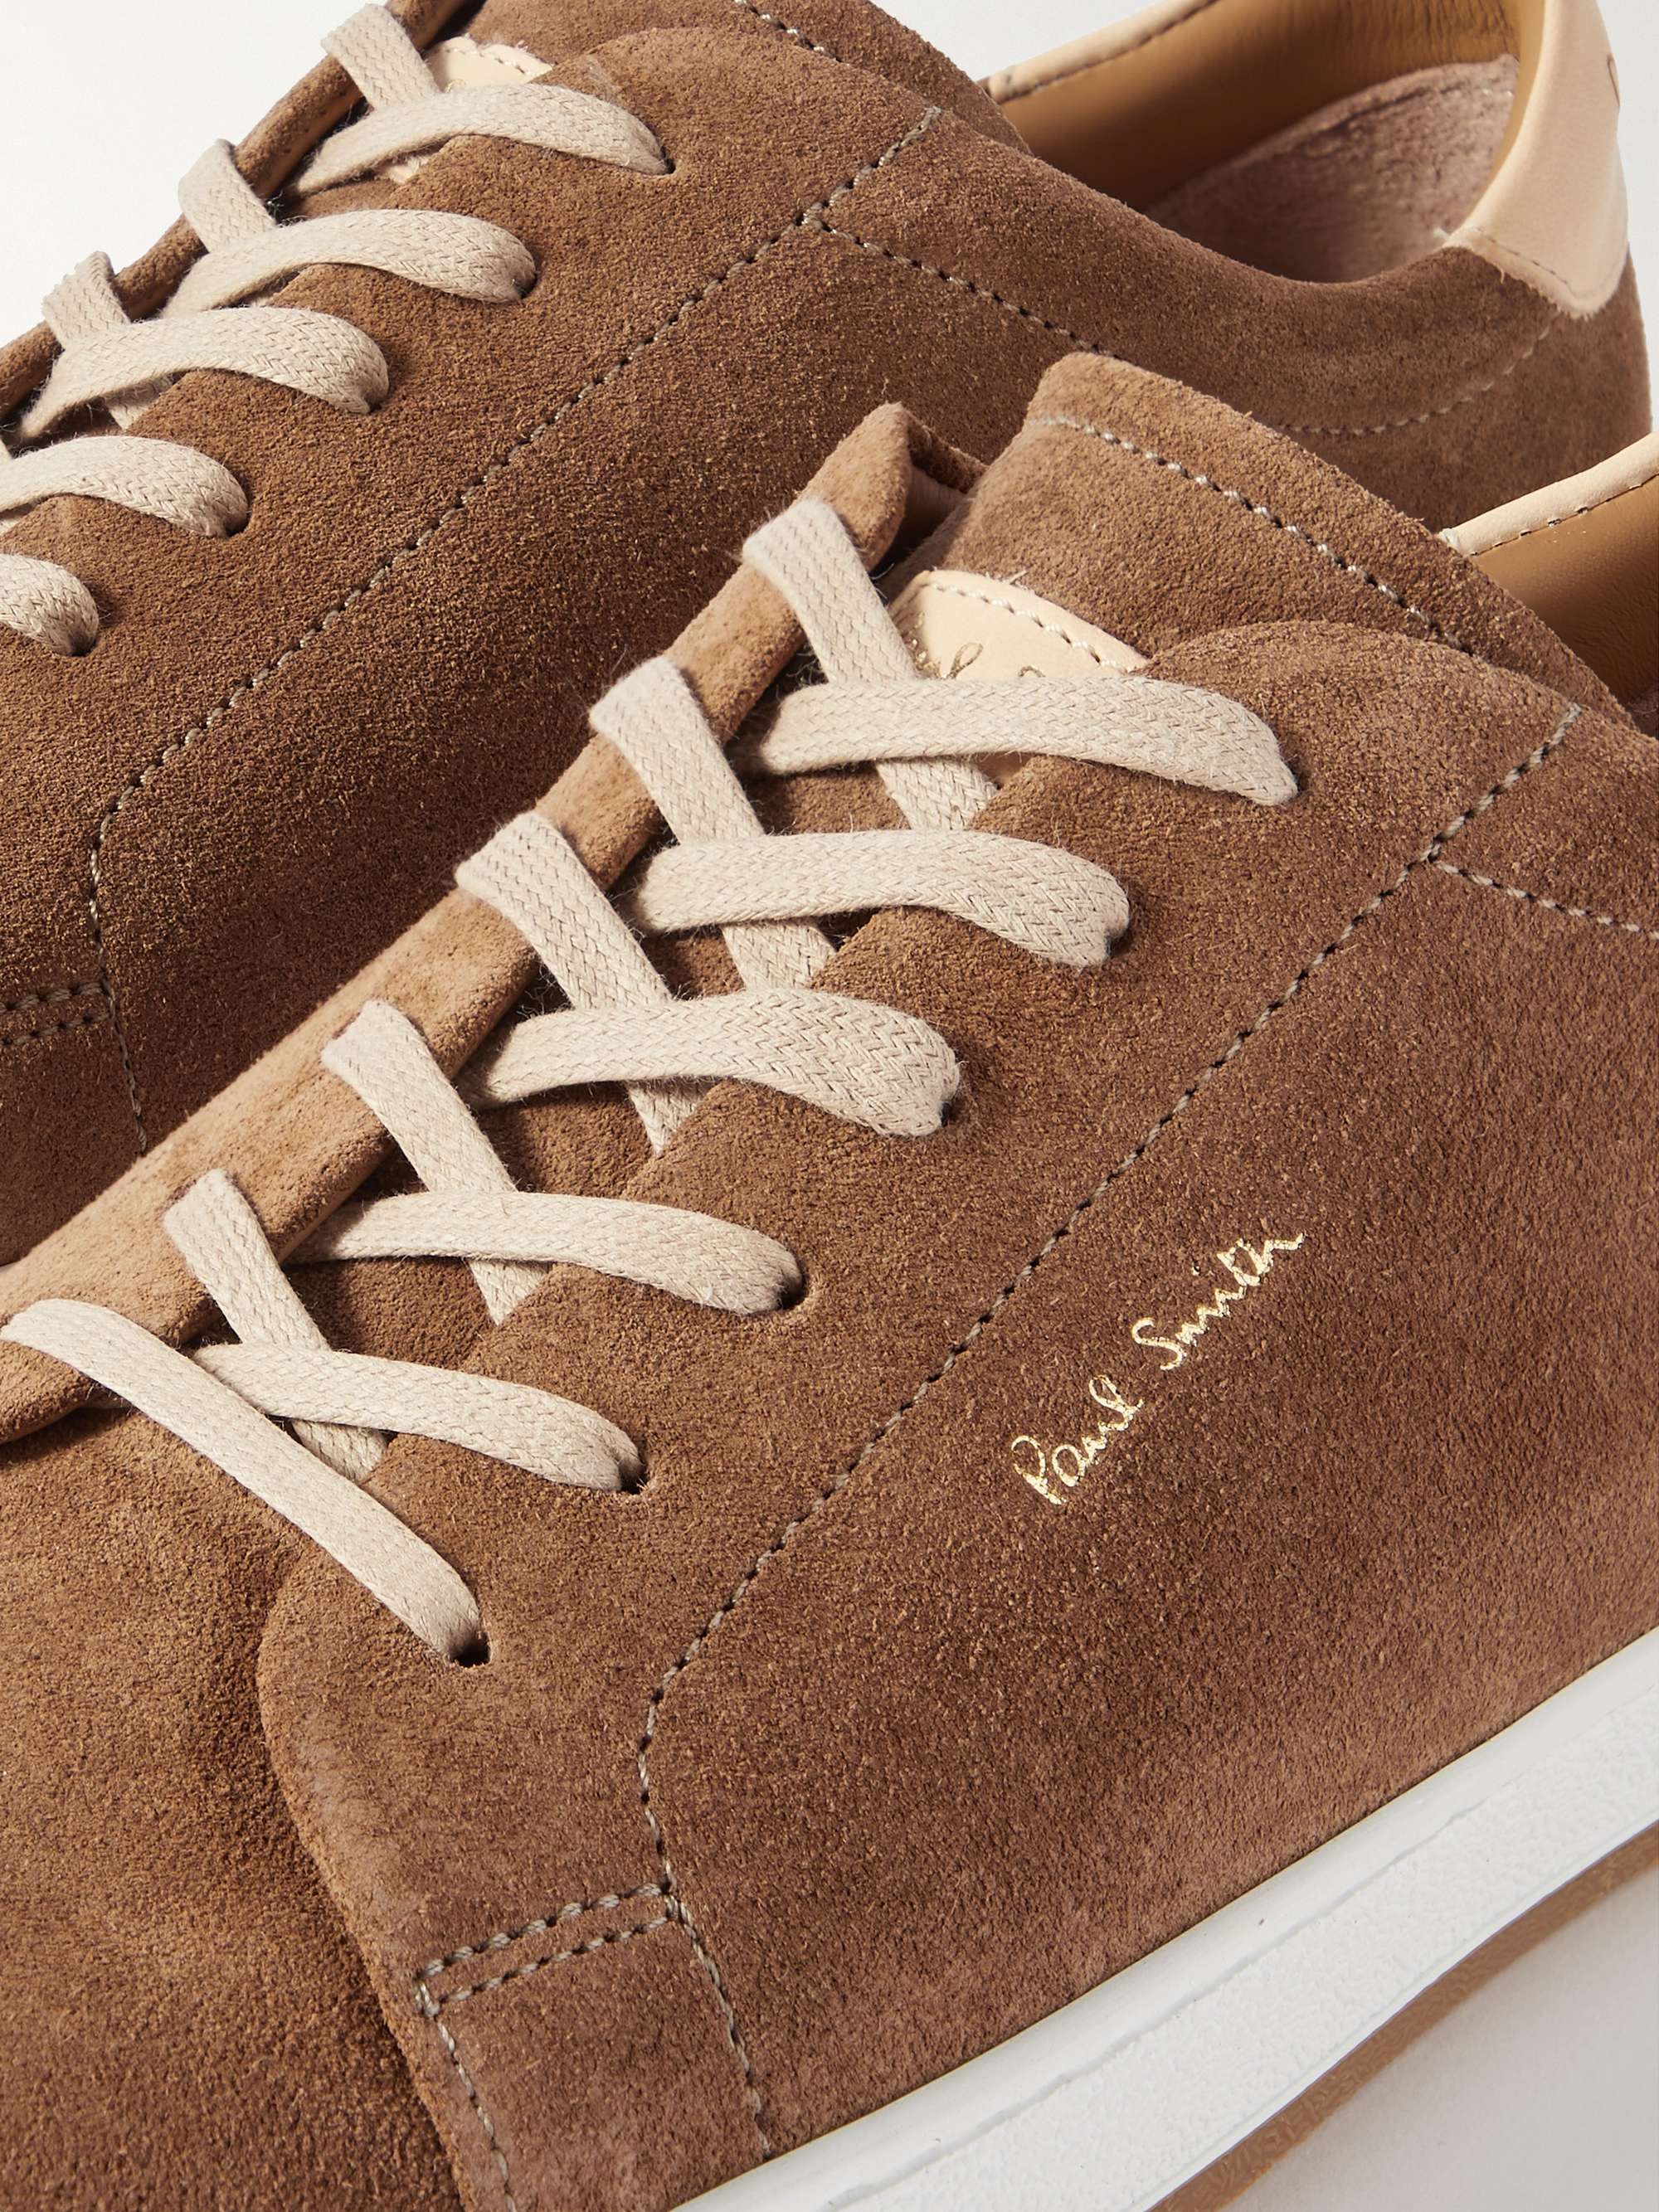 PAUL SMITH Tyrone Leather-Trimmed Suede Sneakers for Men | MR PORTER